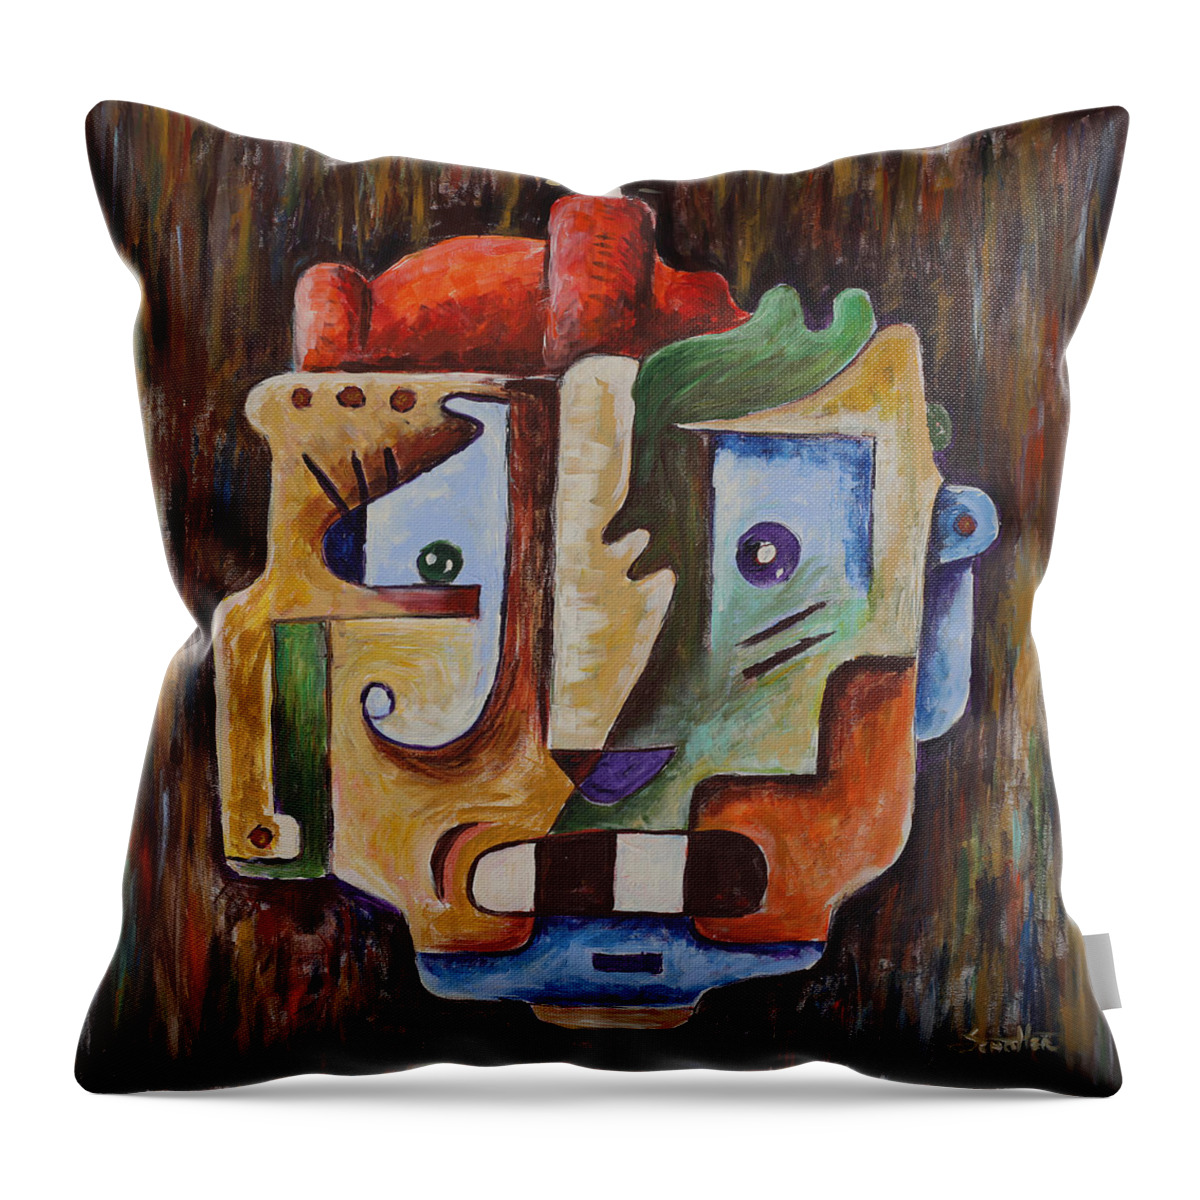 Surrealismo Throw Pillow featuring the painting Surrealism Head by Sotuland Art